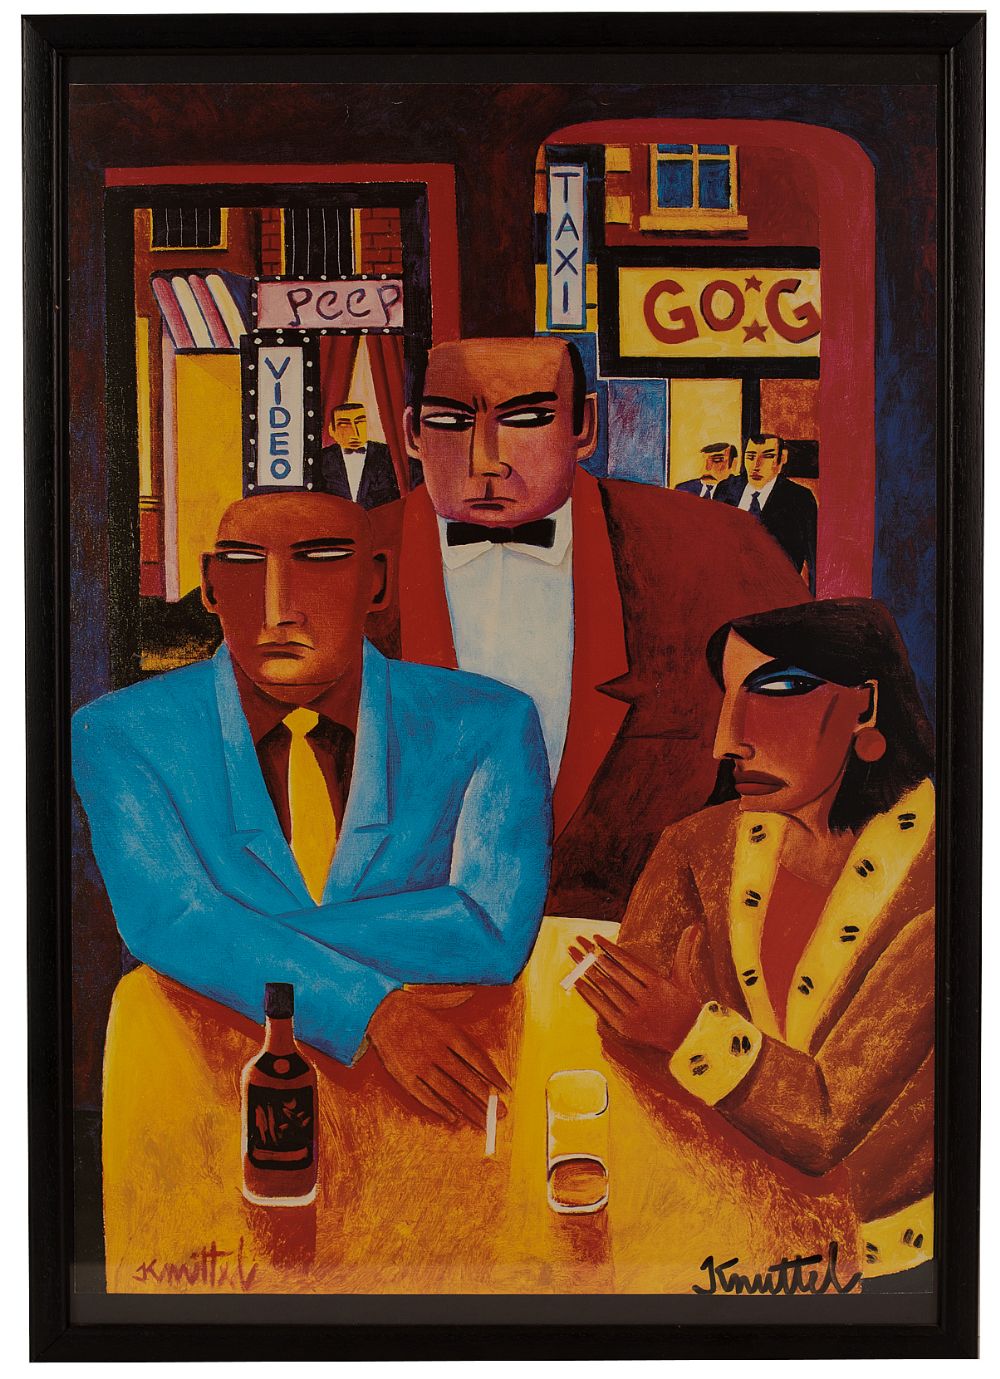 Lot 113 - AT THE BAR by Graham Knuttel, b.1954 | Dolan's Art Auction ...